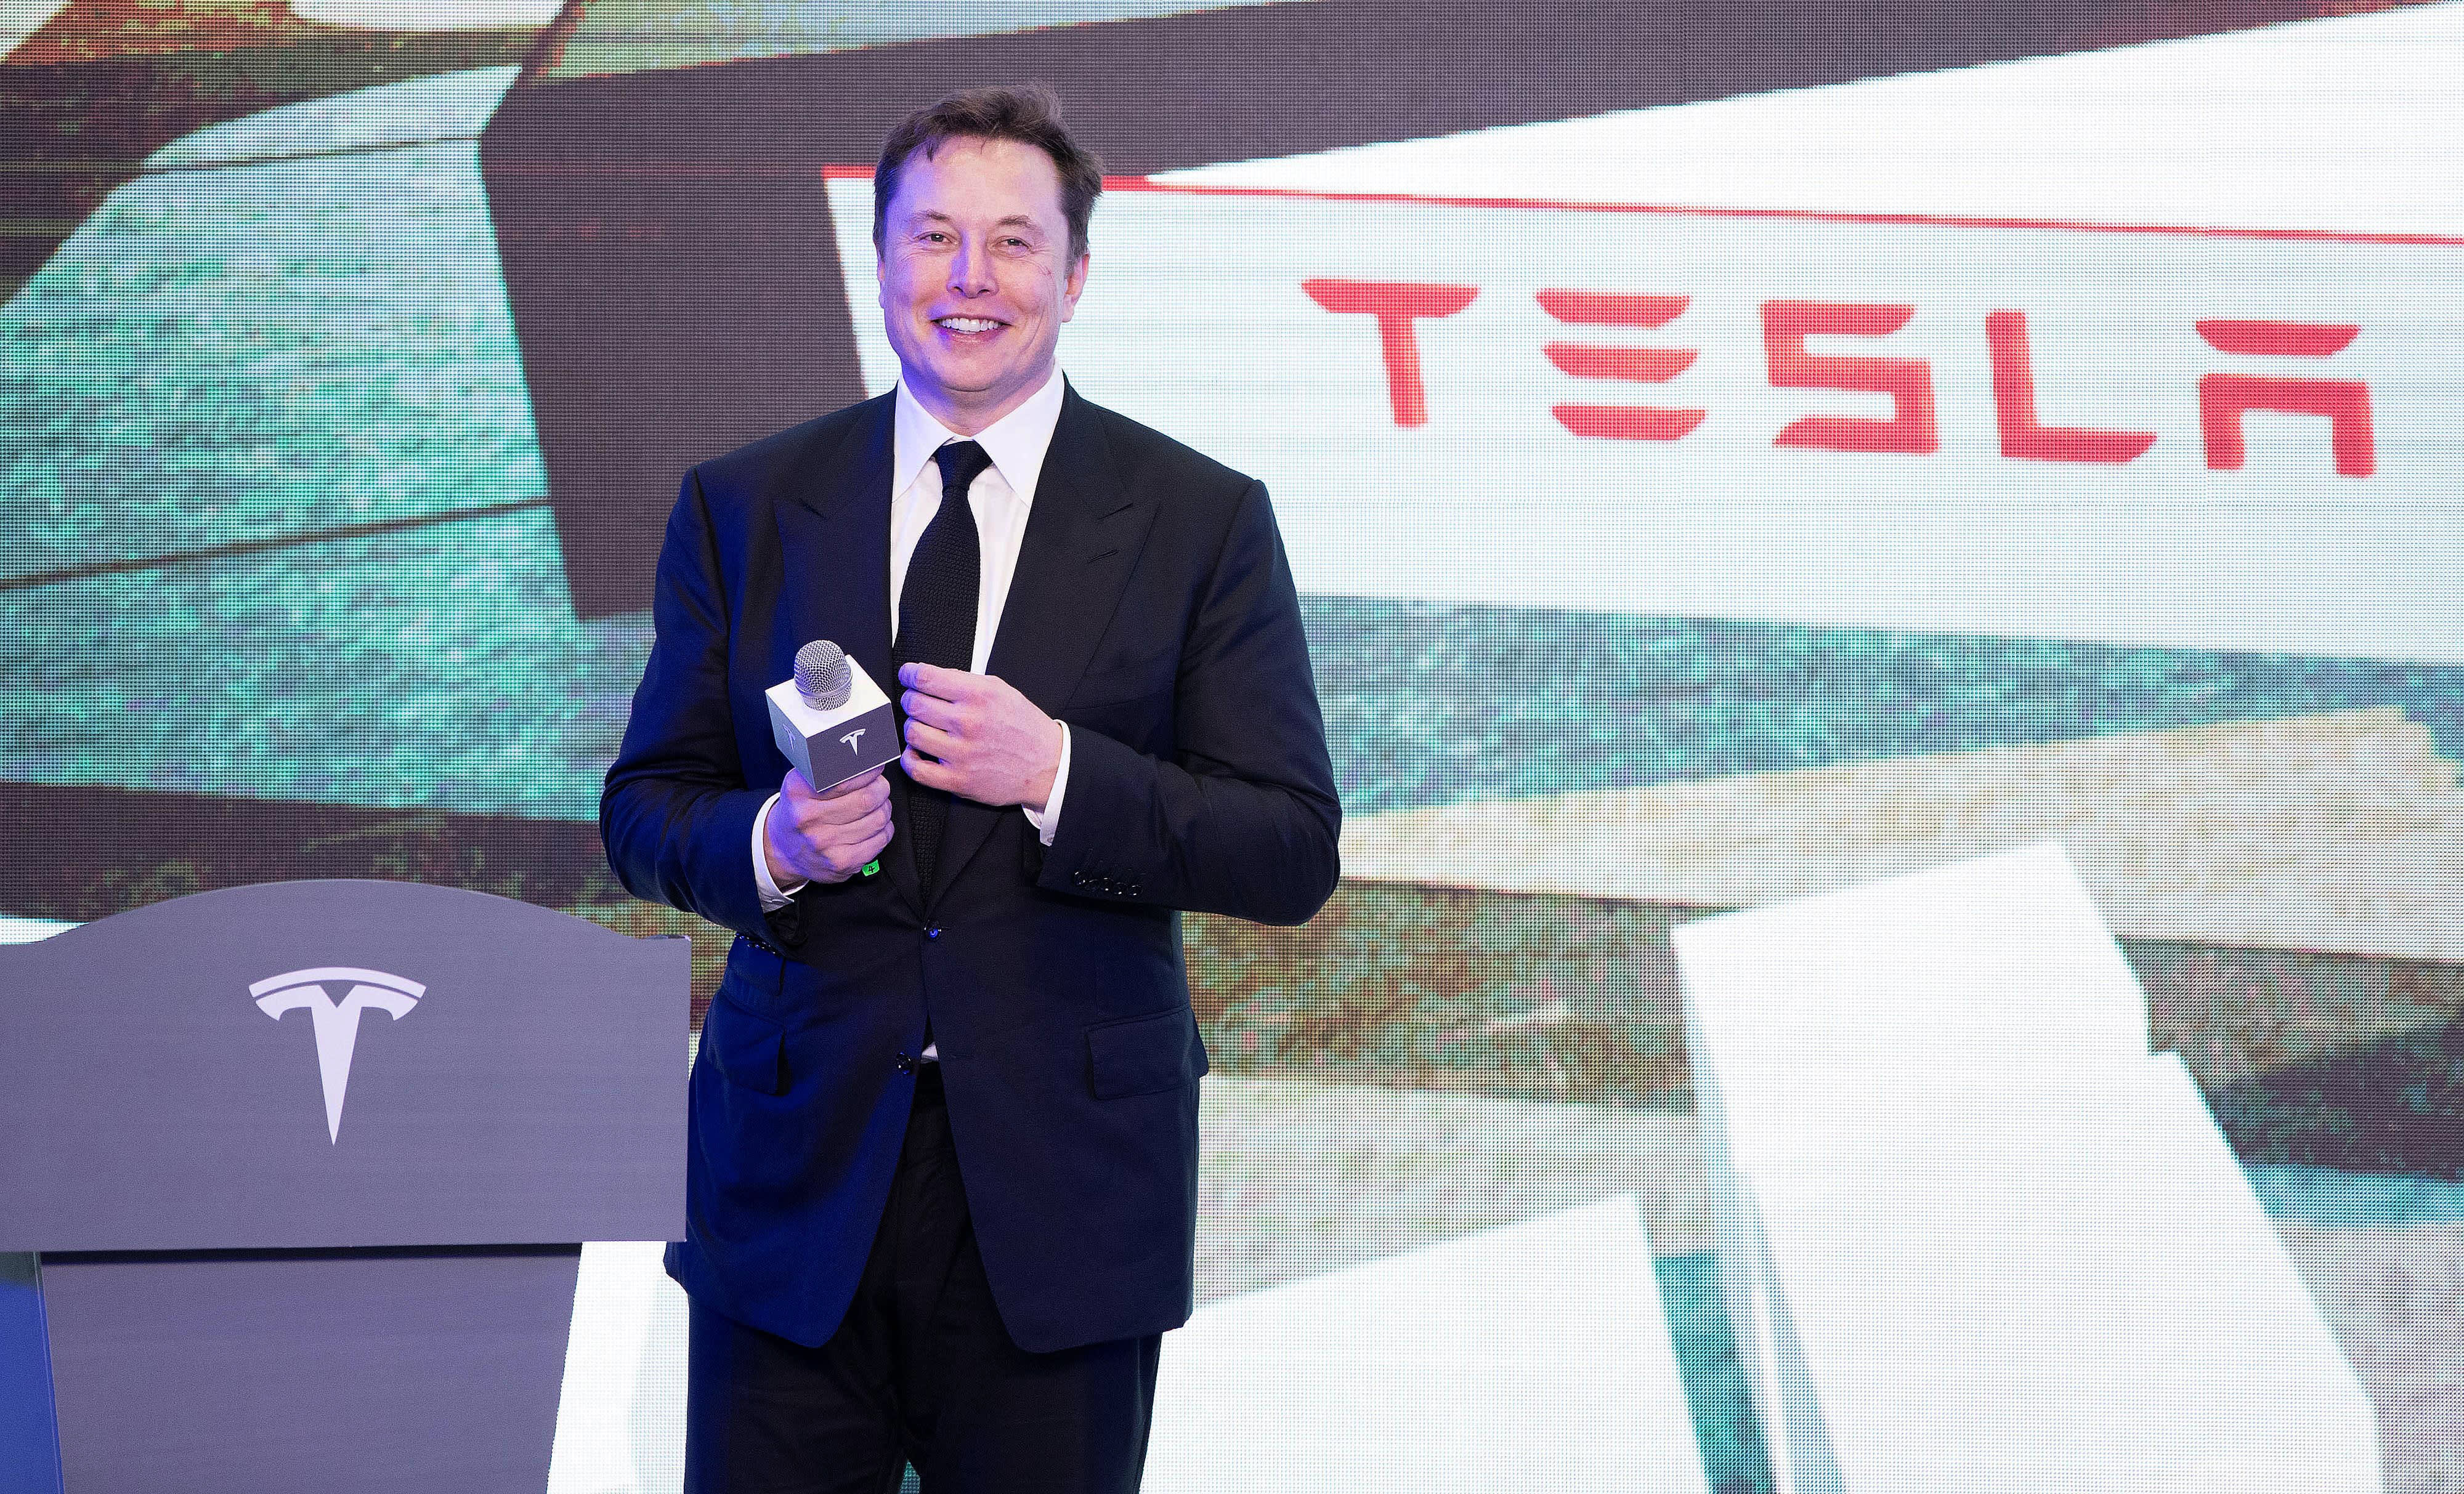 Tesla CEO Elon Musk meets with the Chinese foreign minister and announces expansion